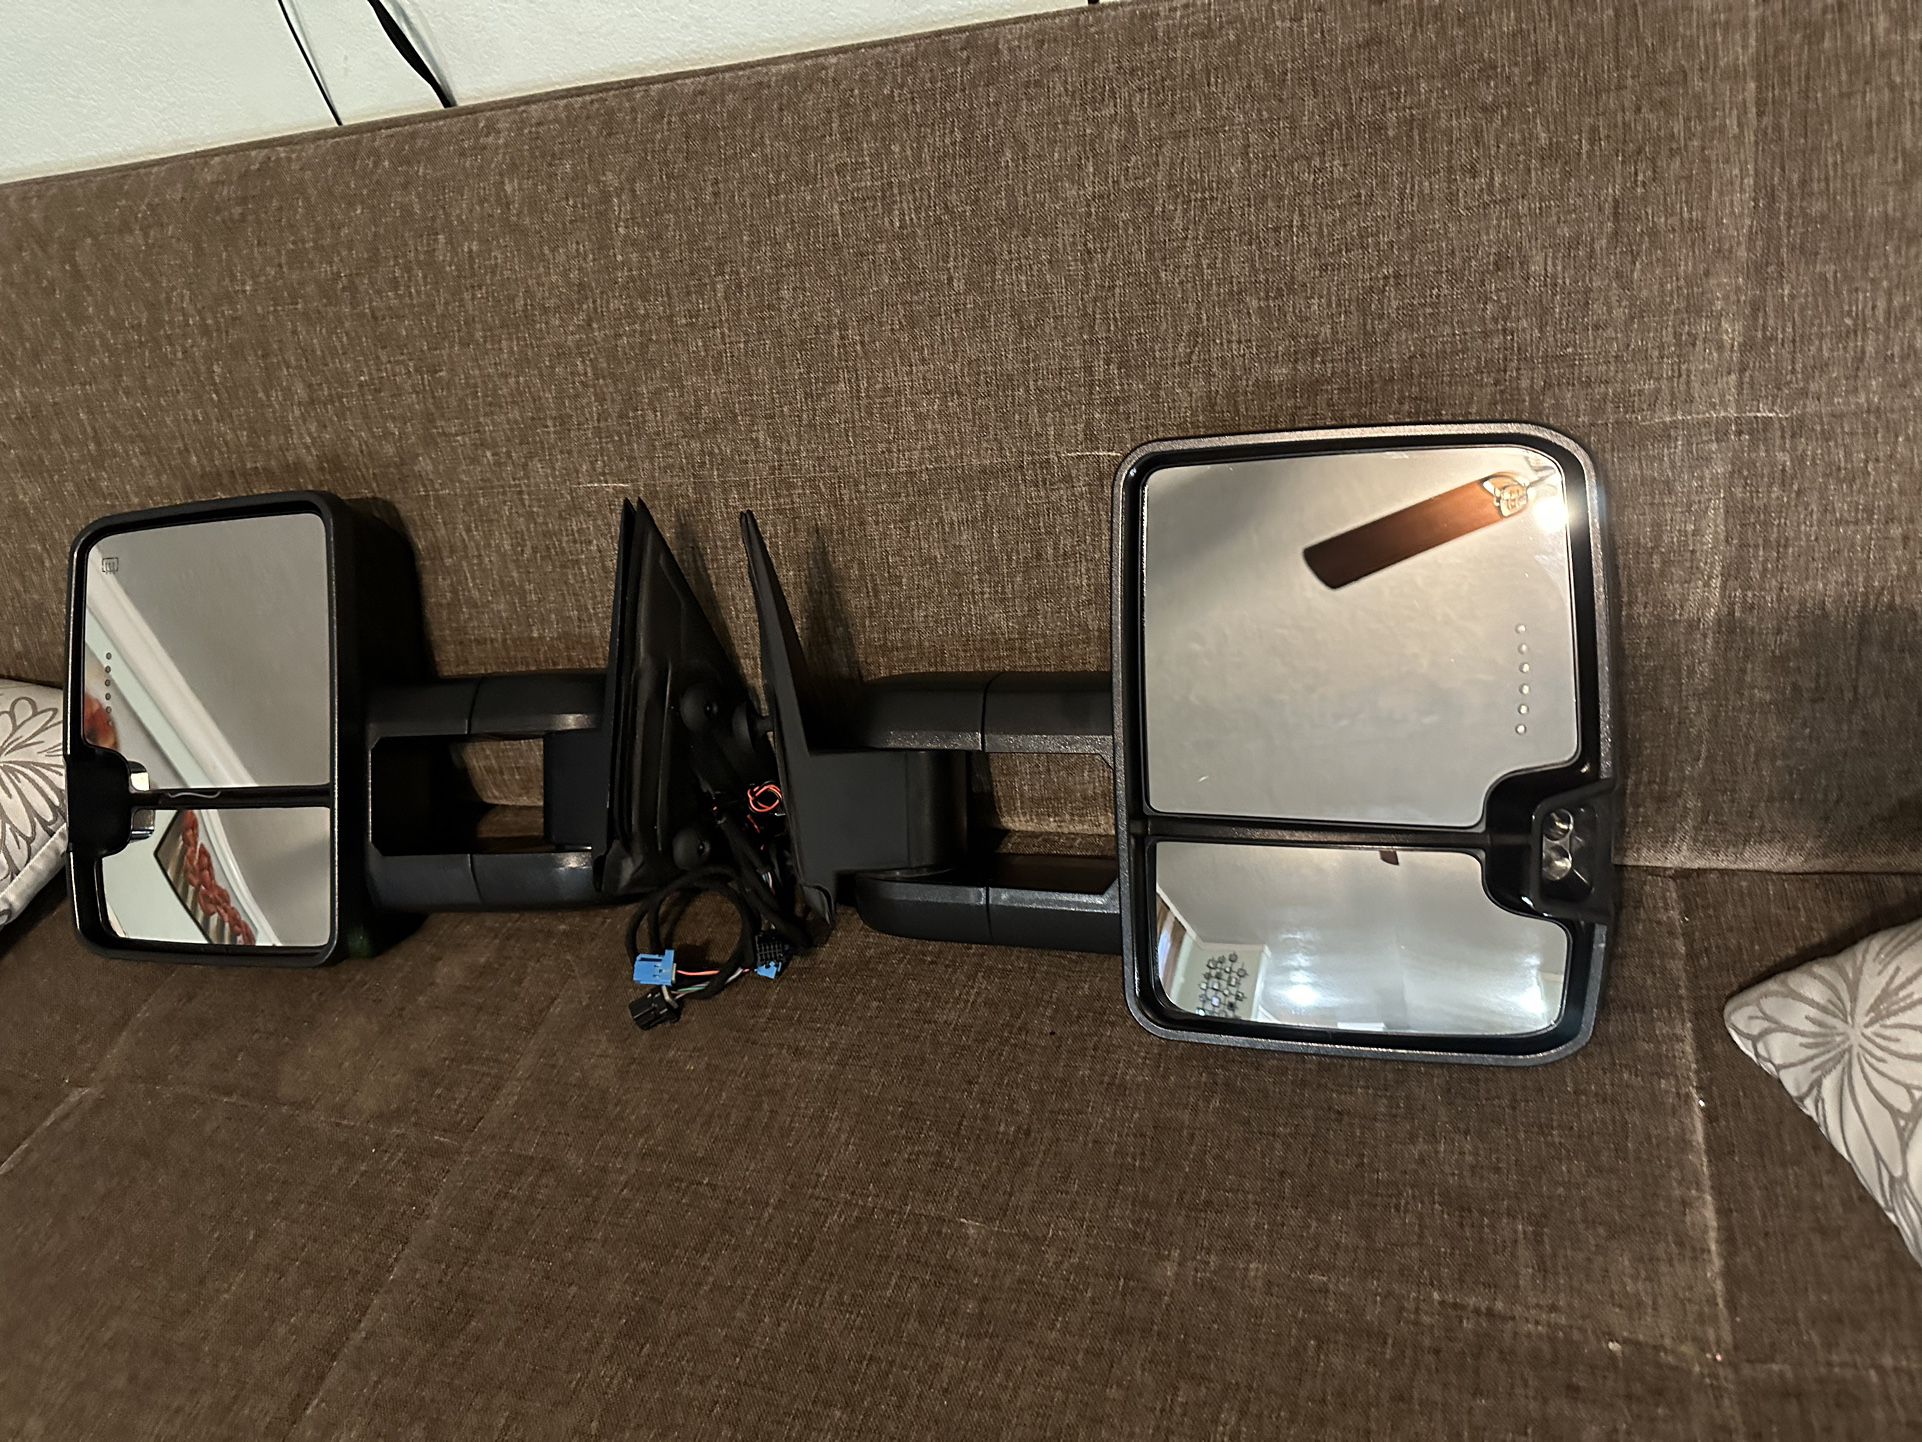 Chevy Tow Mirrors 